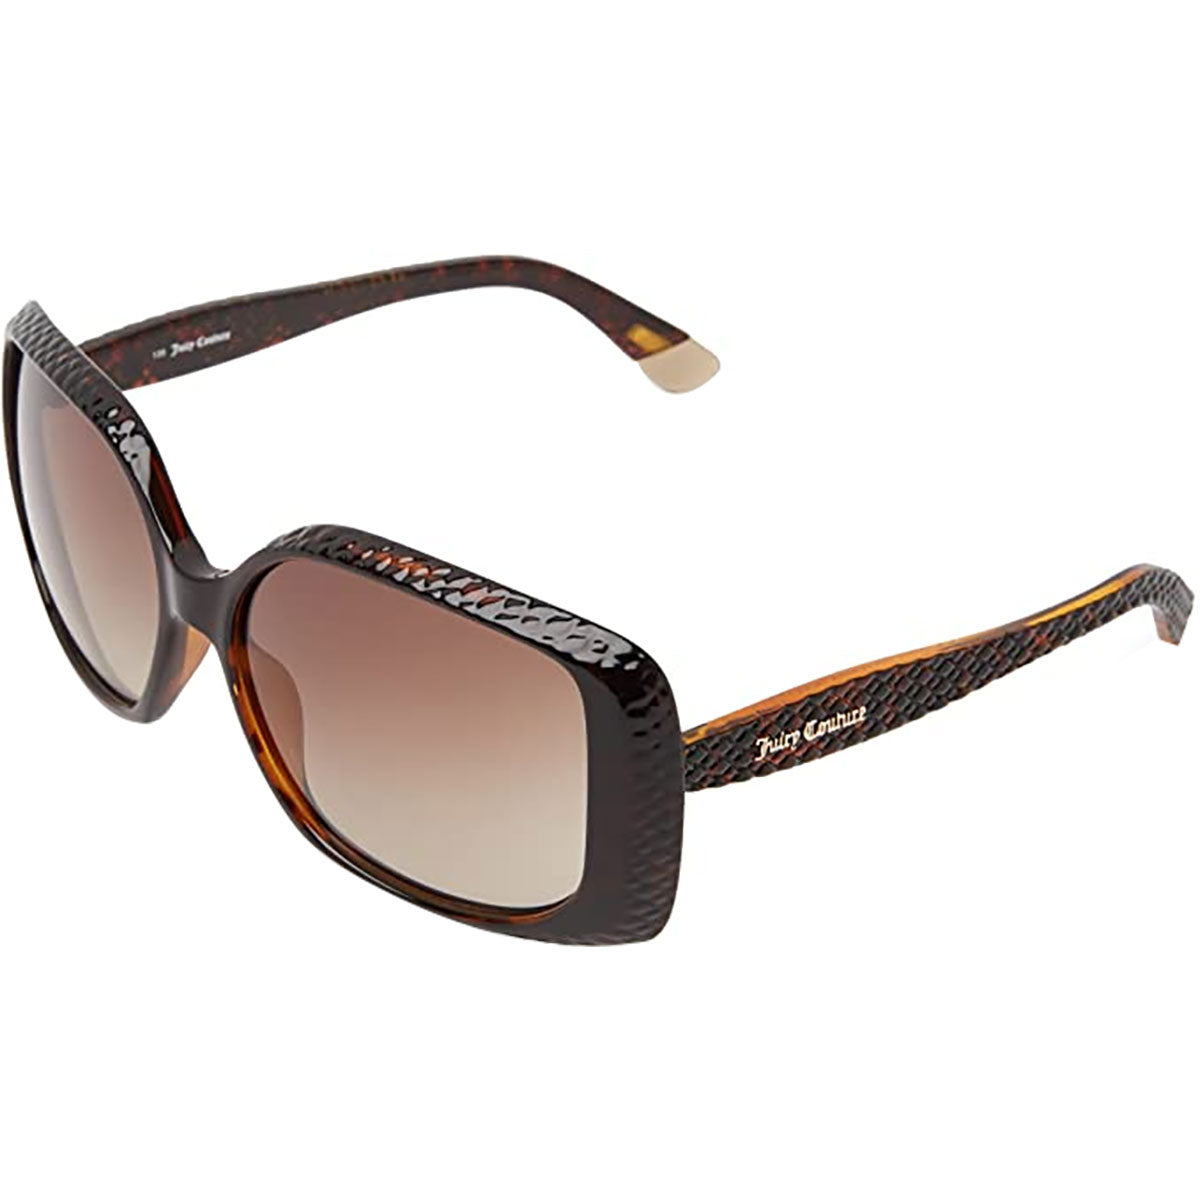 Juicy Couture 530/S Women's Lifestyle Sunglasses-JUC